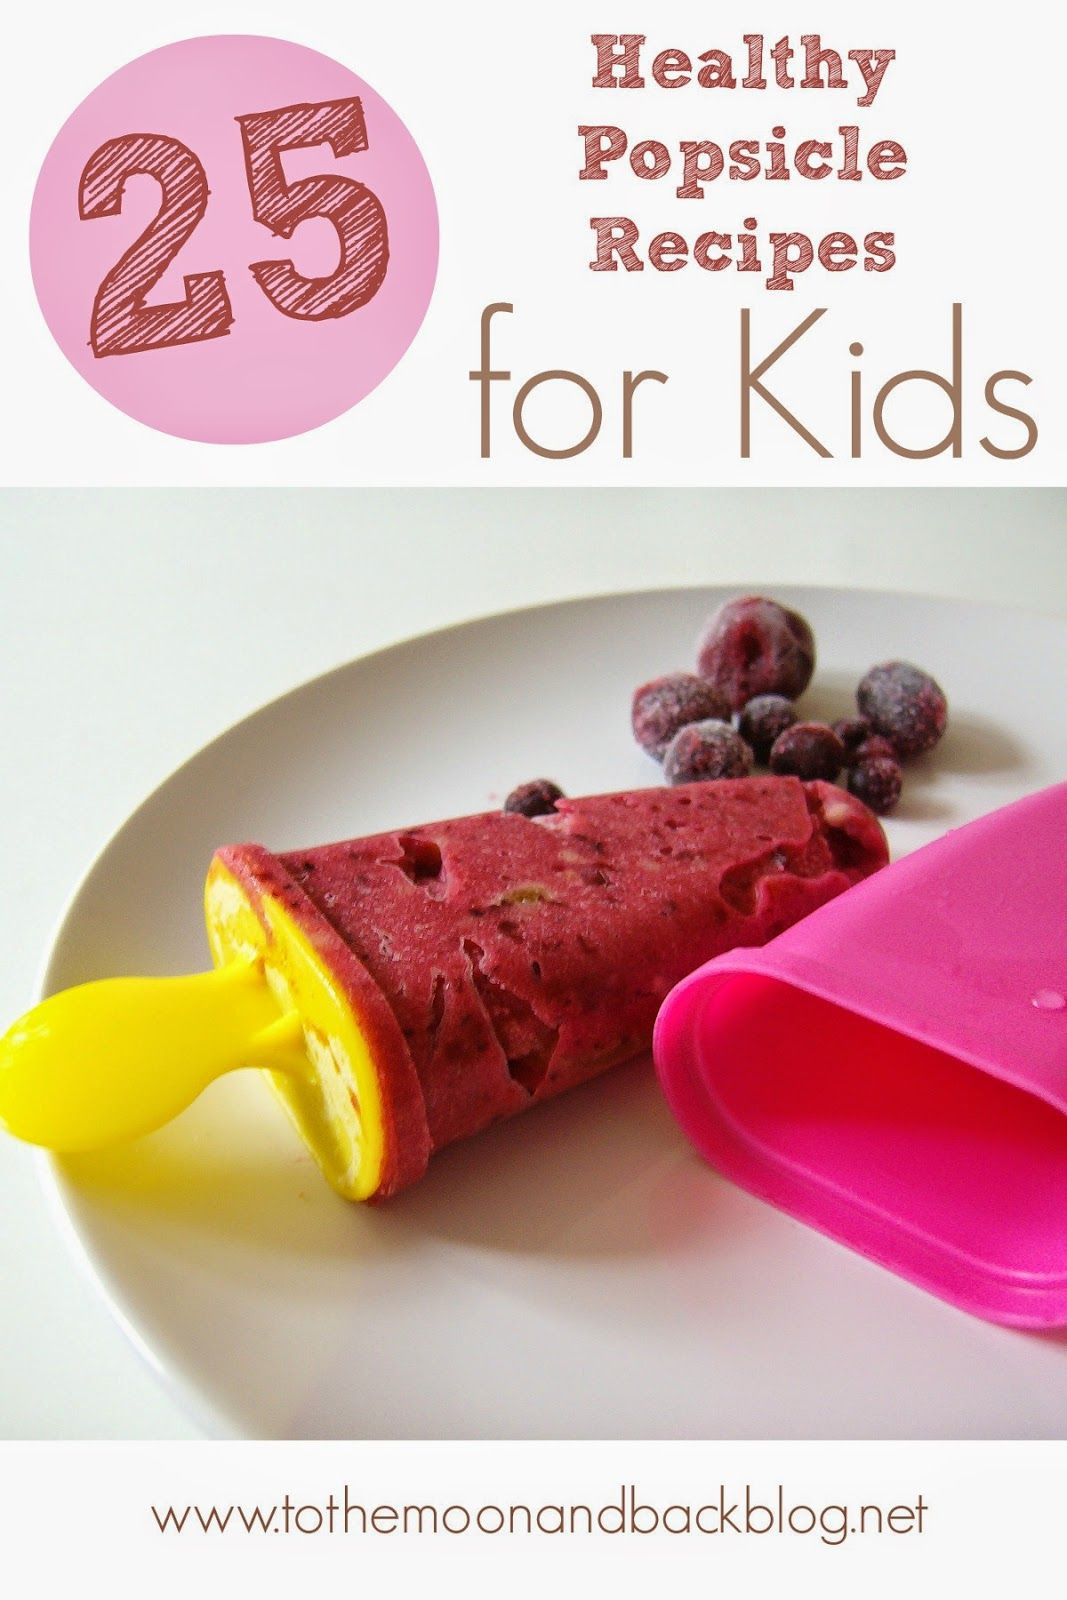 Popsicle Recipes For Kids
 25 Healthy Popsicle Recipes for Kids